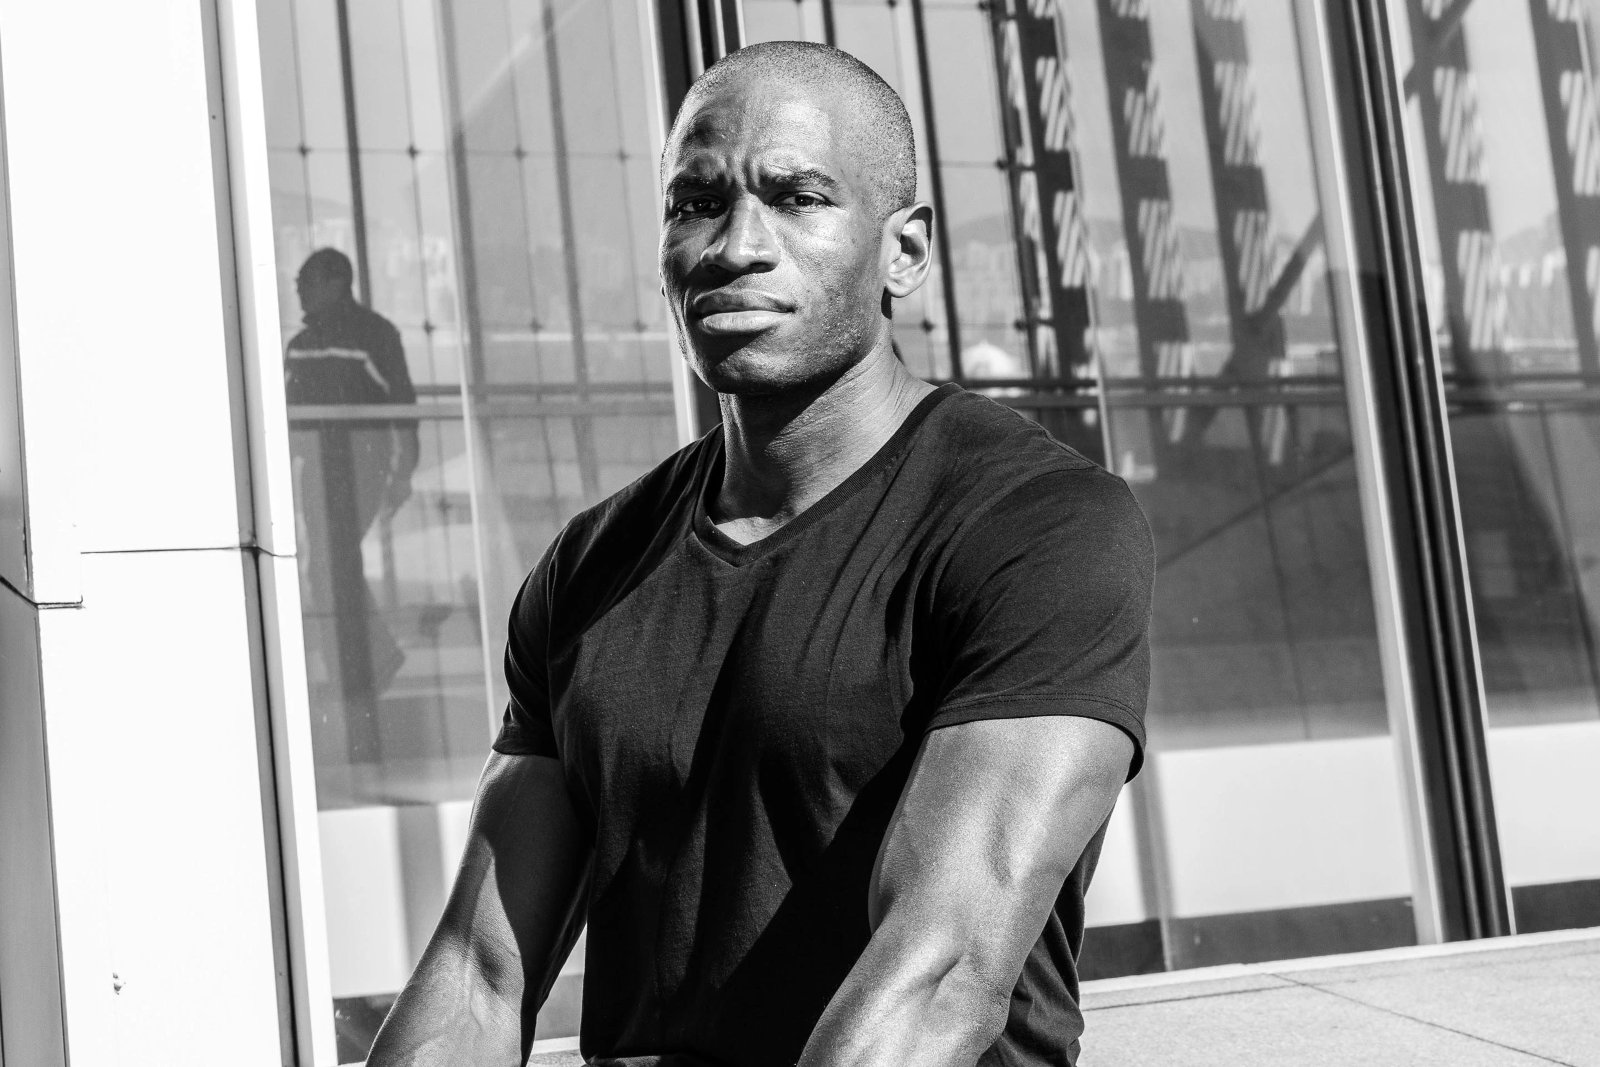 Bitmex’s Arthur Hayes Requests Leniency, No Jail Time for Violating the US Bank Secrecy Act